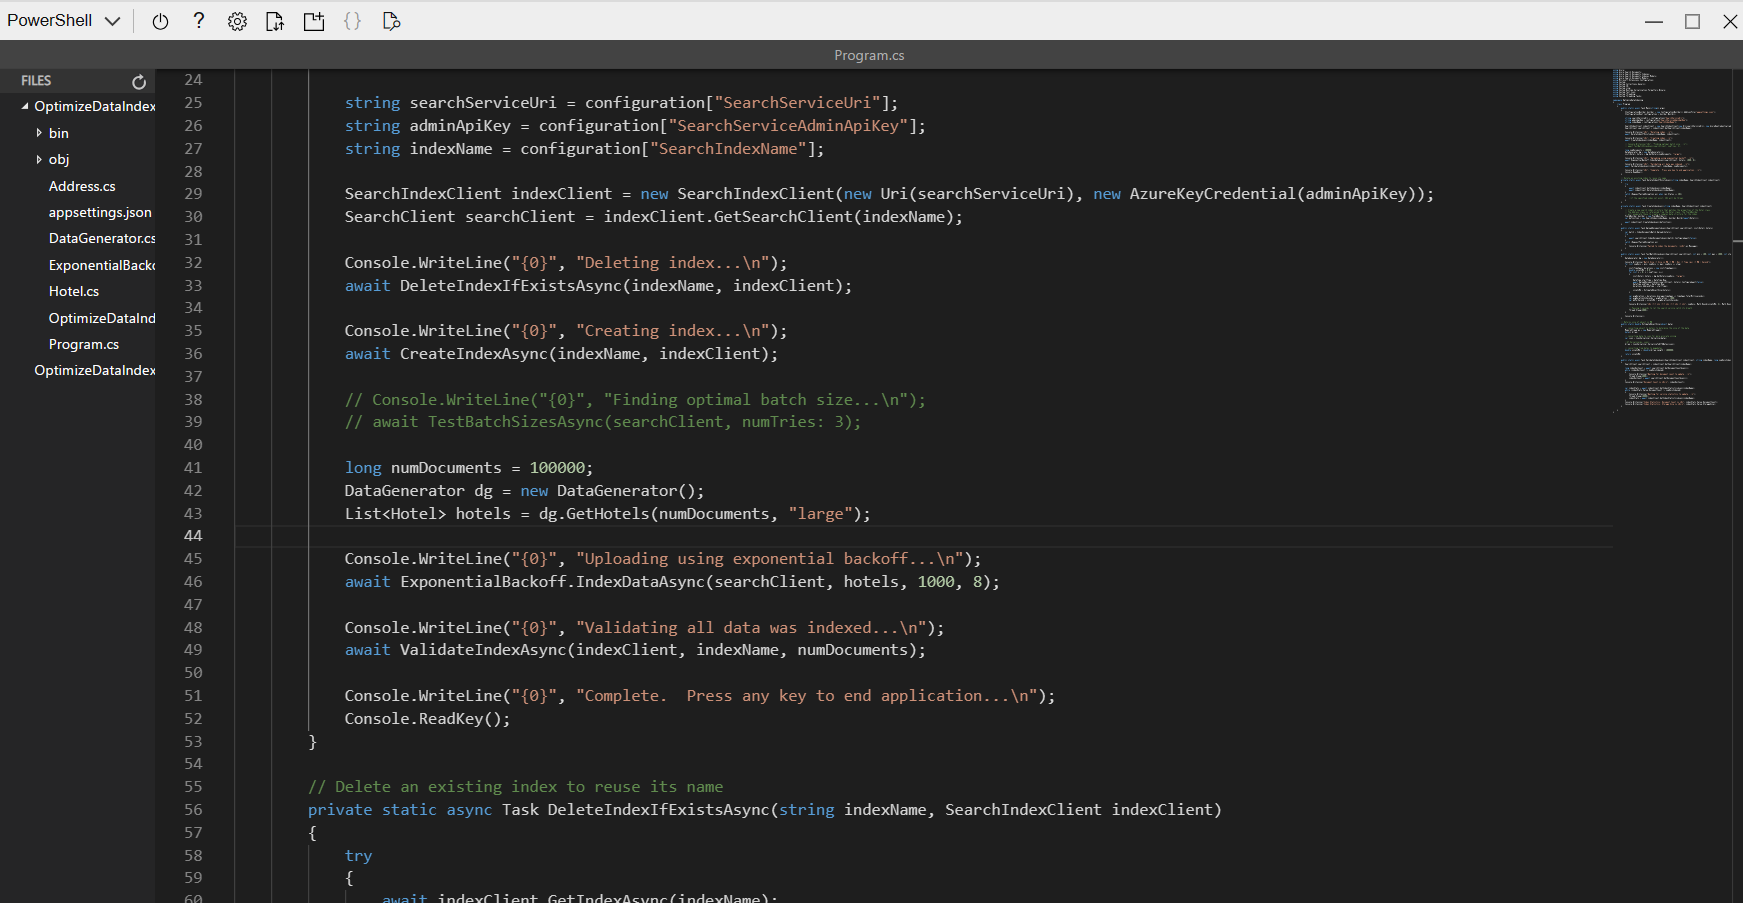 A screenshot showing all the edited code.